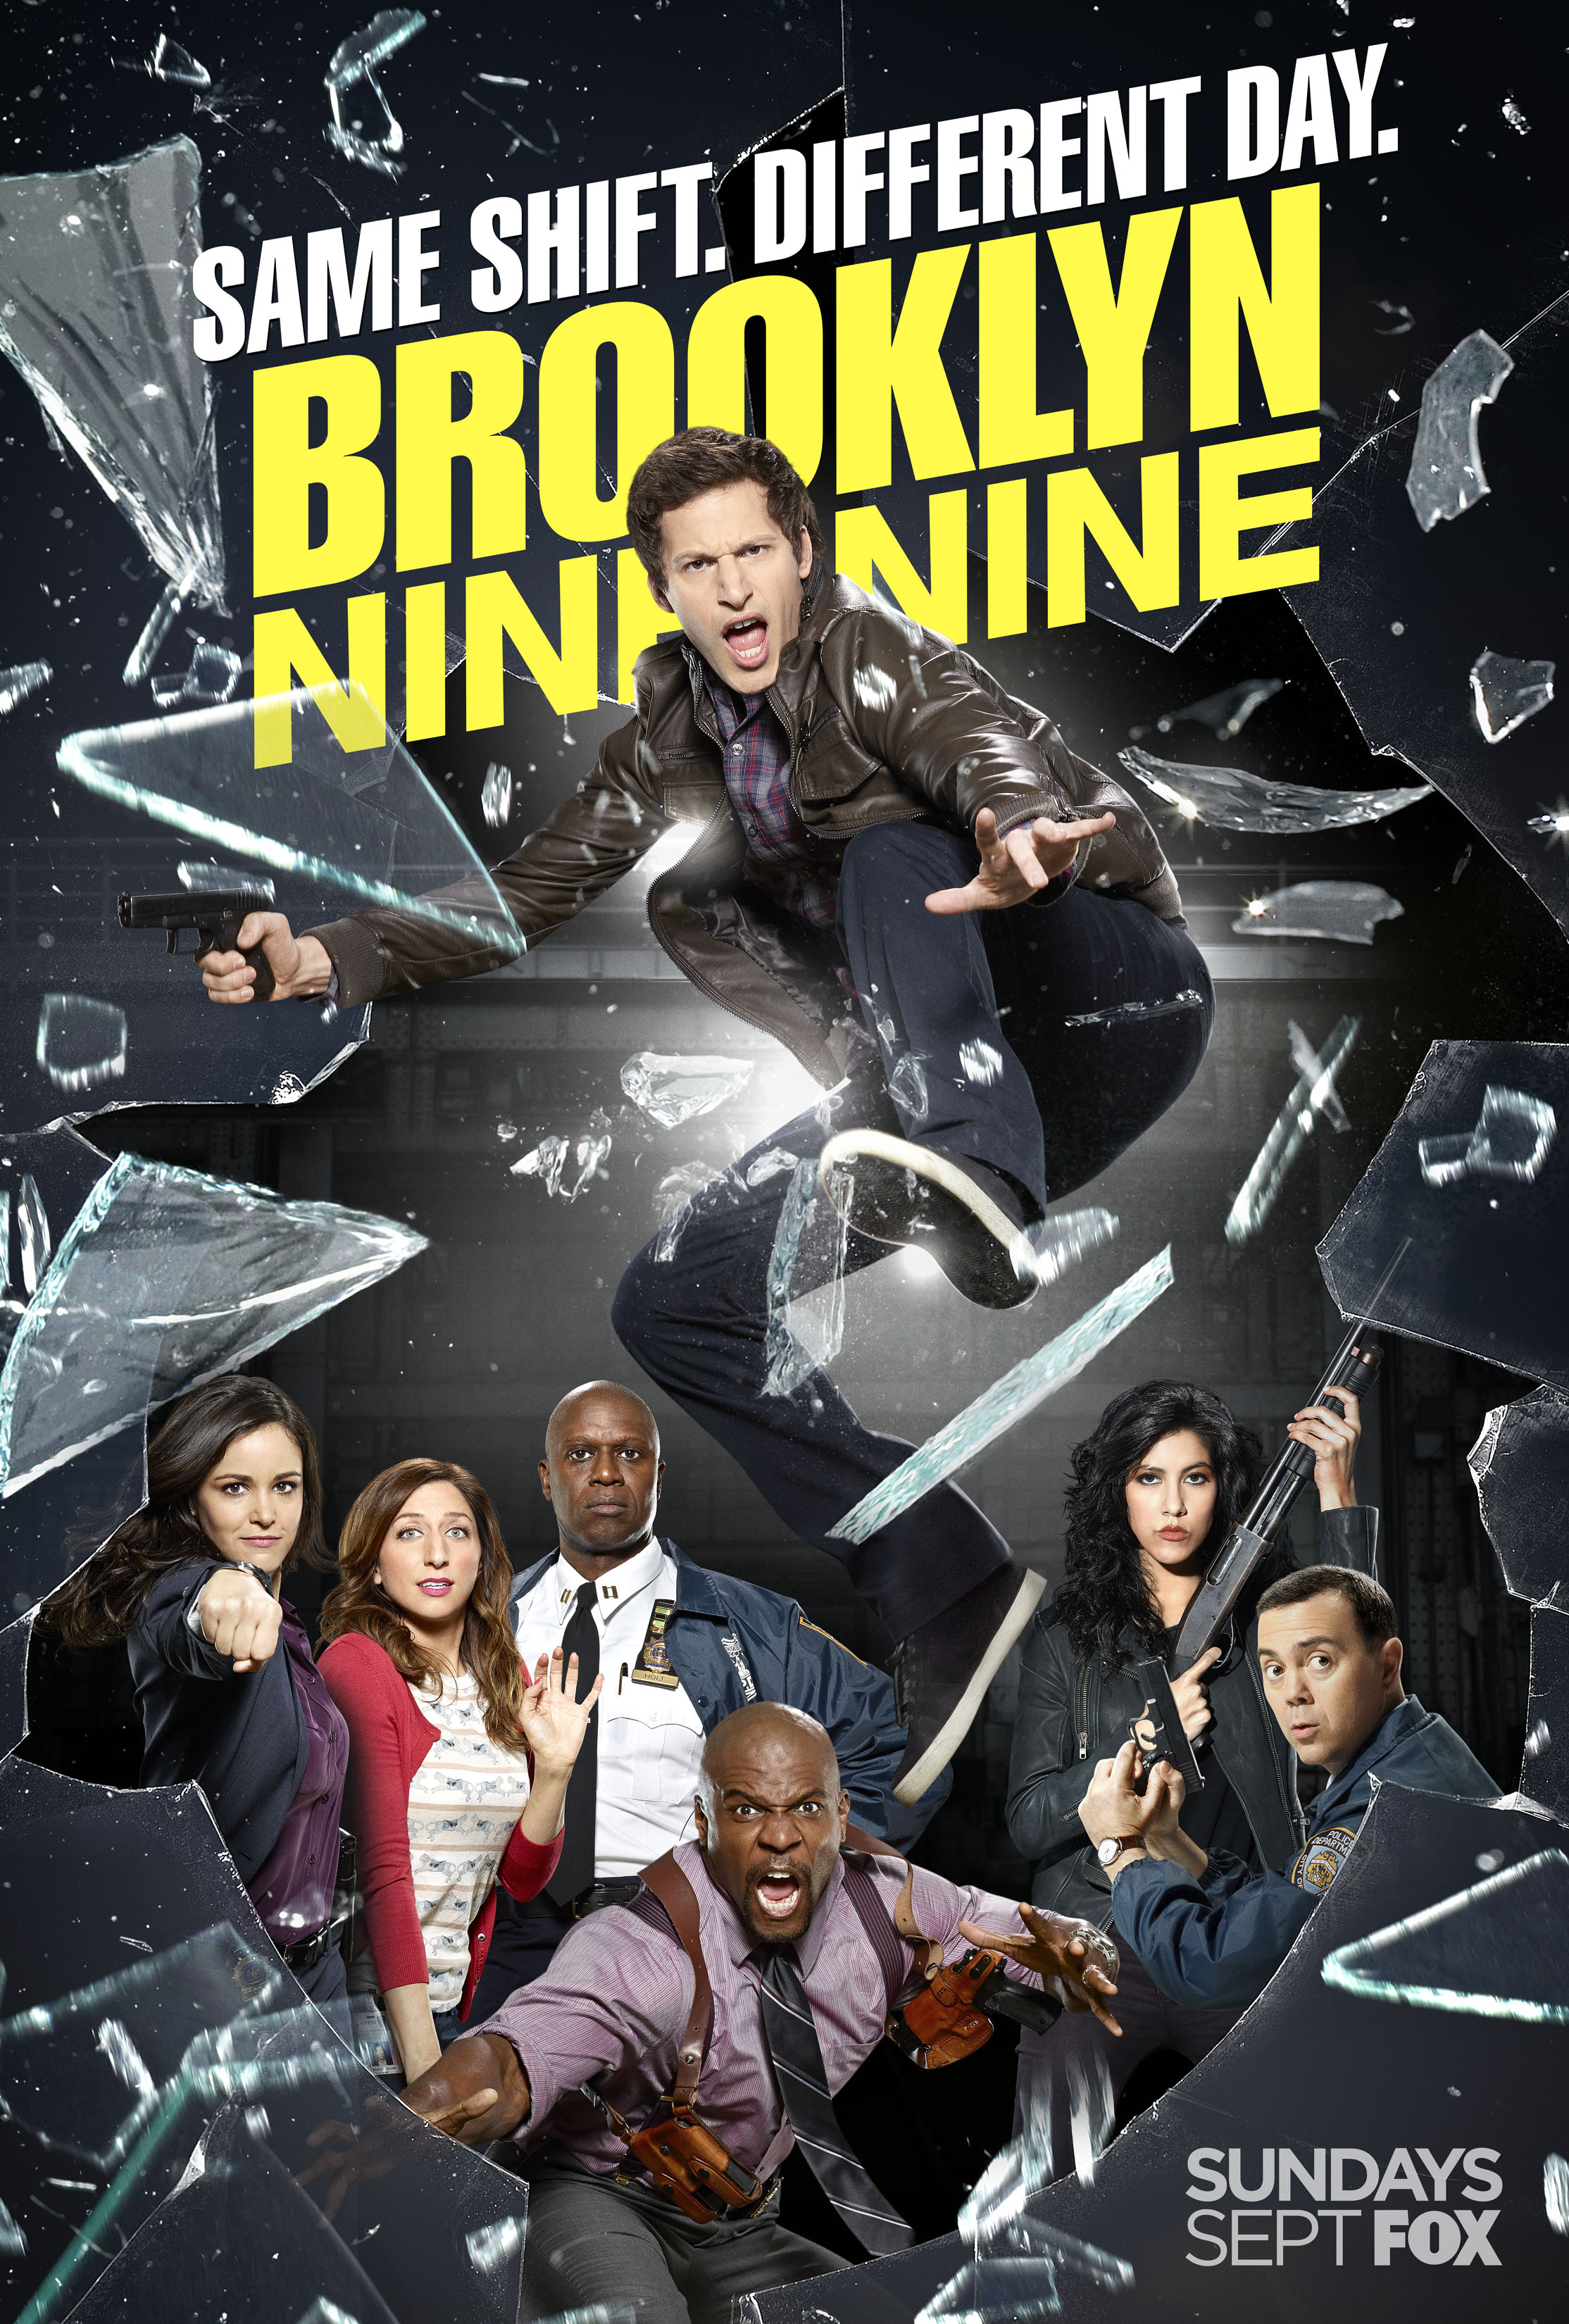 Brooklyn Nine-Nine Backgrounds, Compatible - PC, Mobile, Gadgets| 2228x3300 px